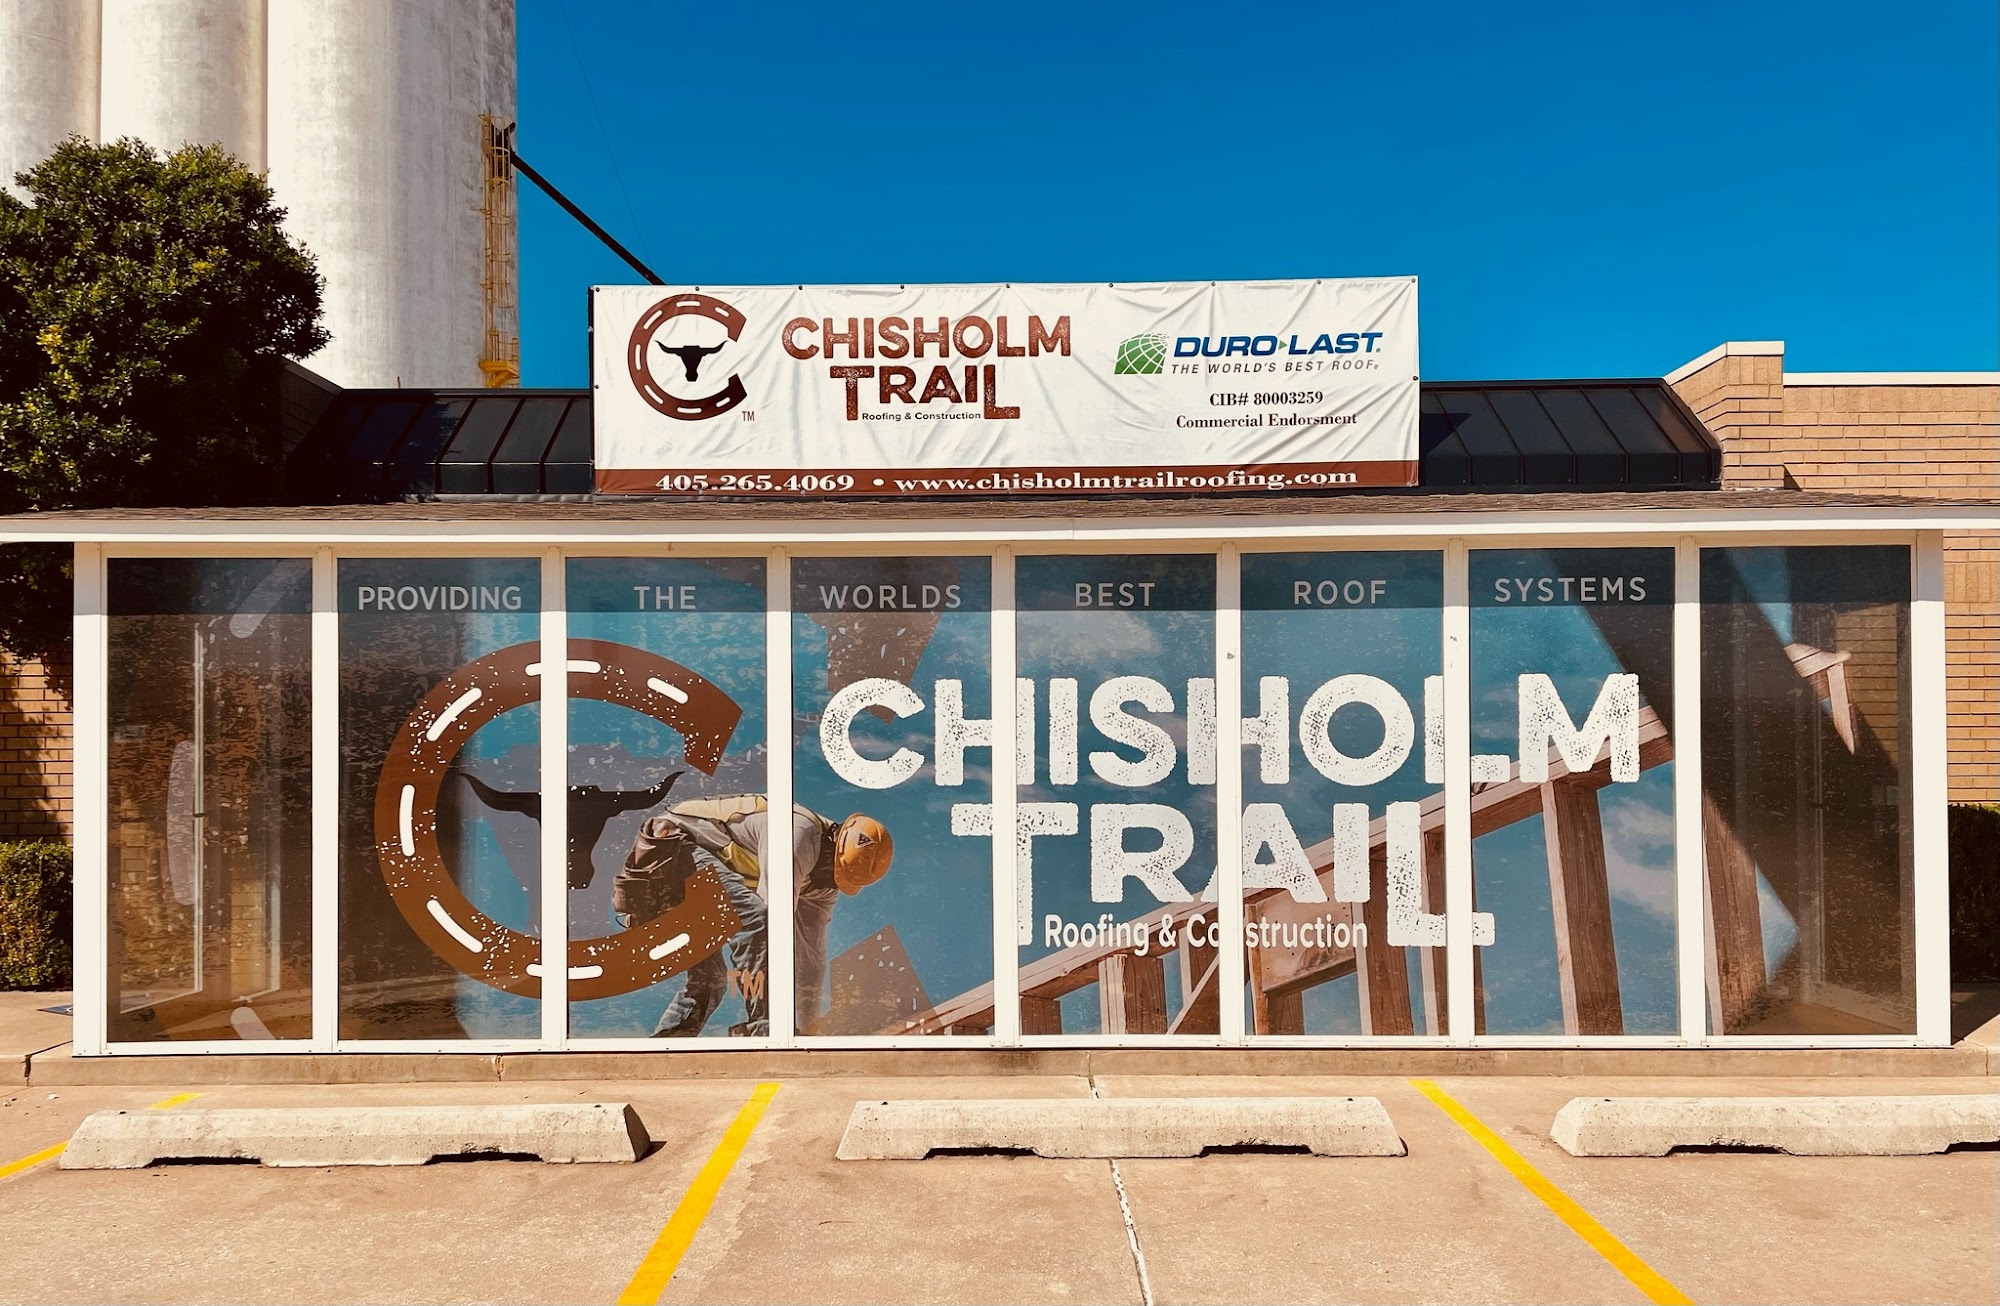 Chisholm Trail Roofing & Construction